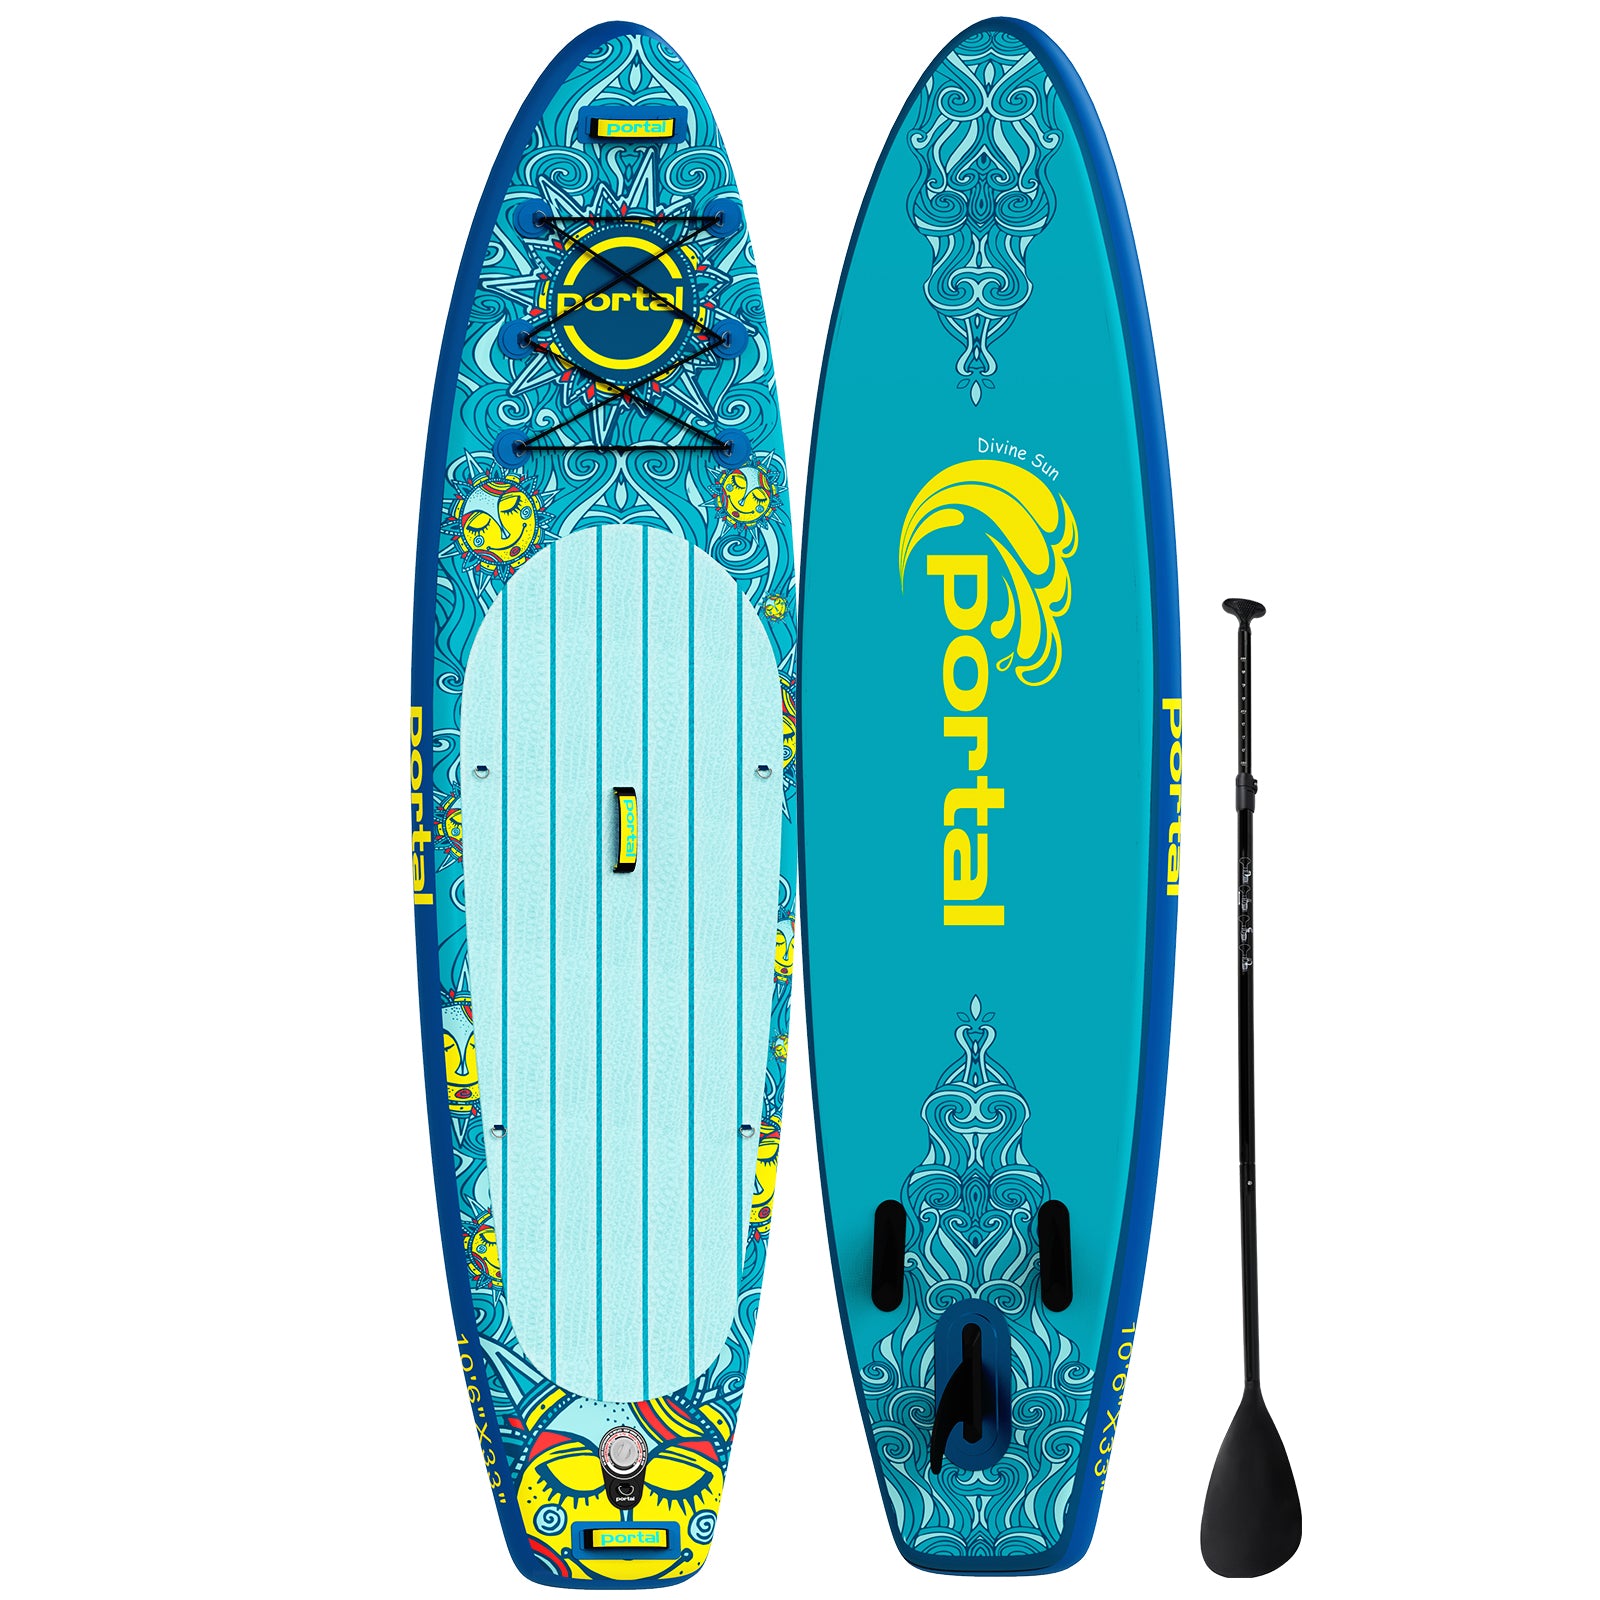 Portal Outdoors Divine Sun Inflatable Stand Up Paddle Board 10'6"x33"x6"